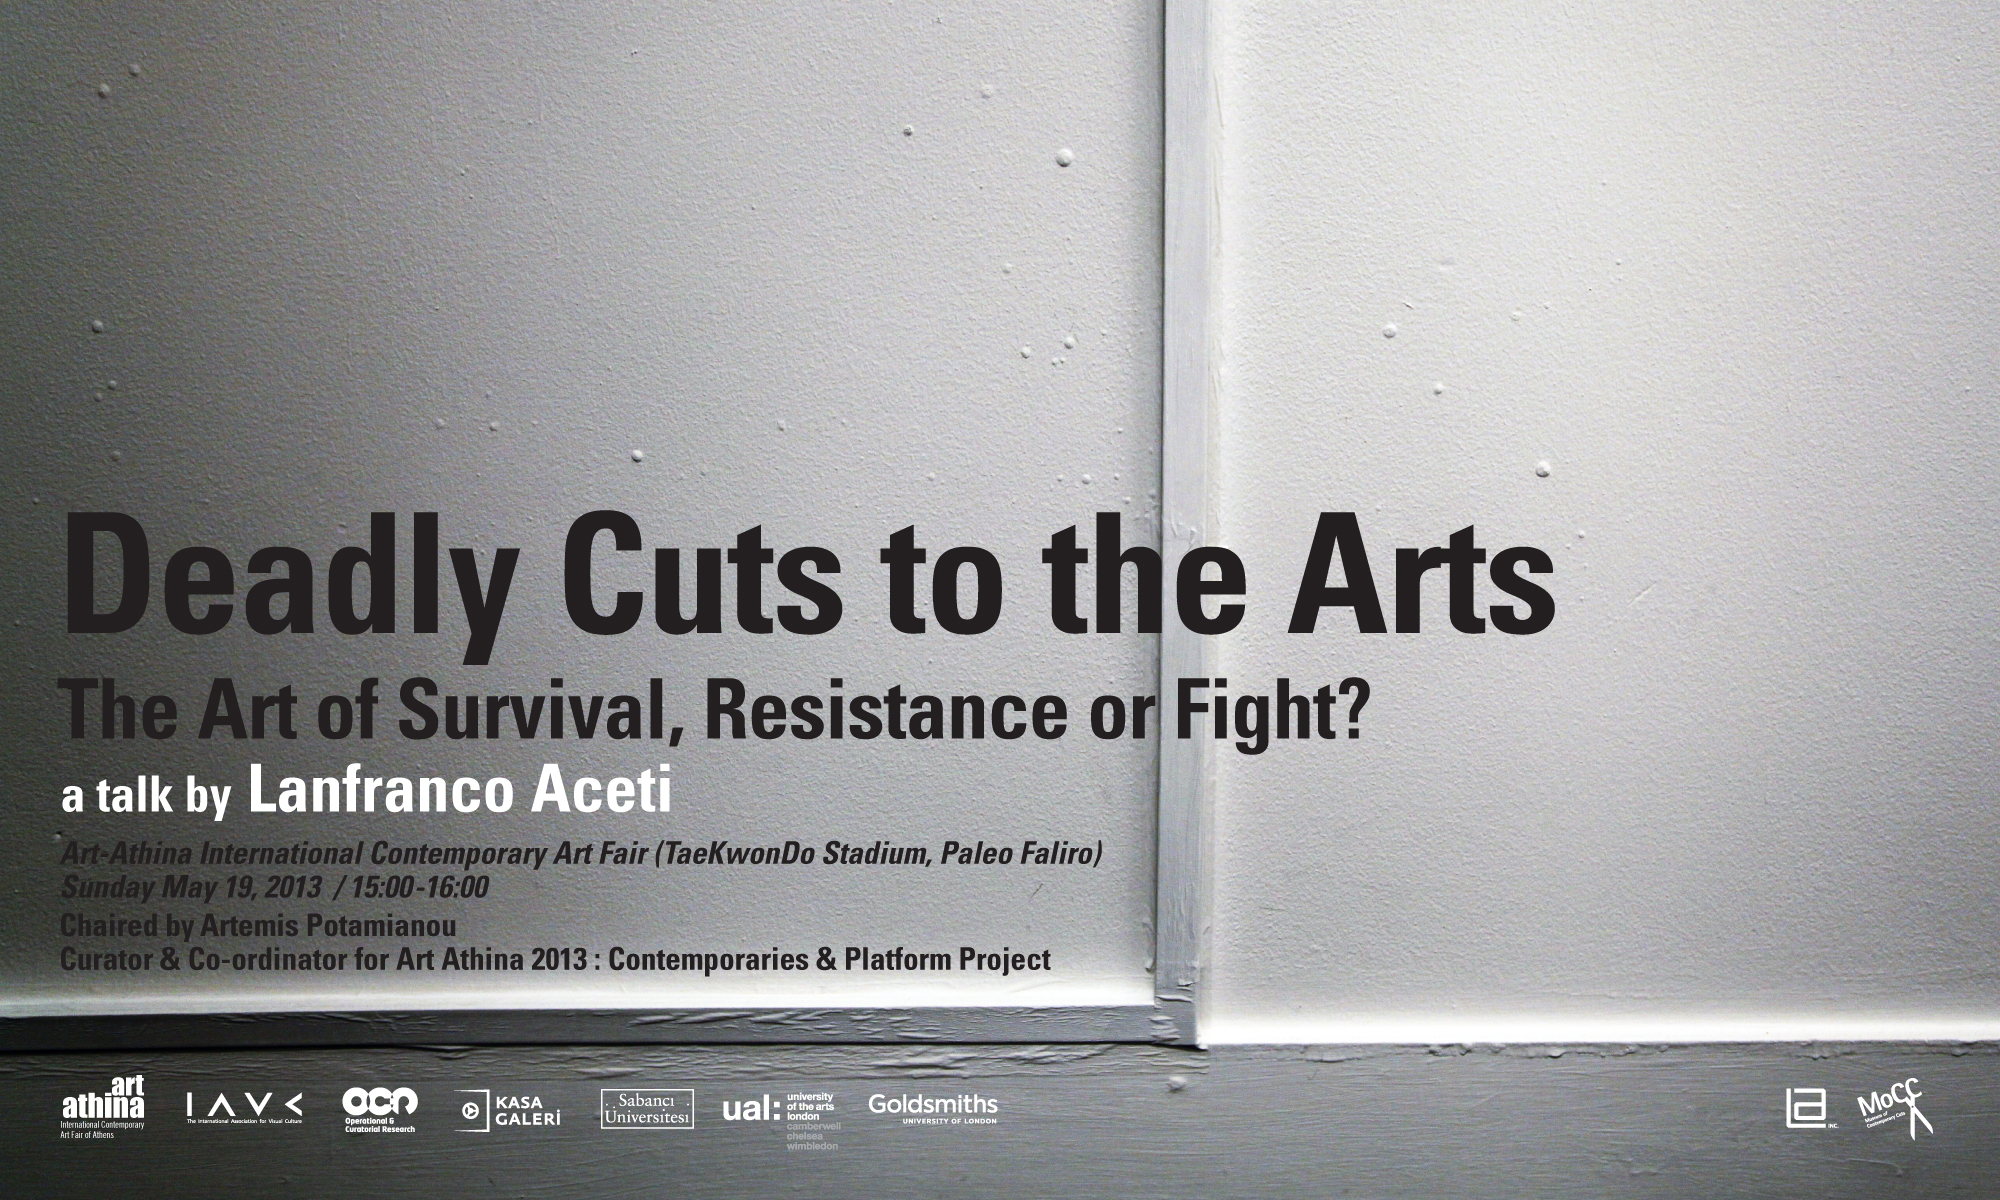 Deadly Cuts to the Arts: The Art of Survival, Resistance or Fight?